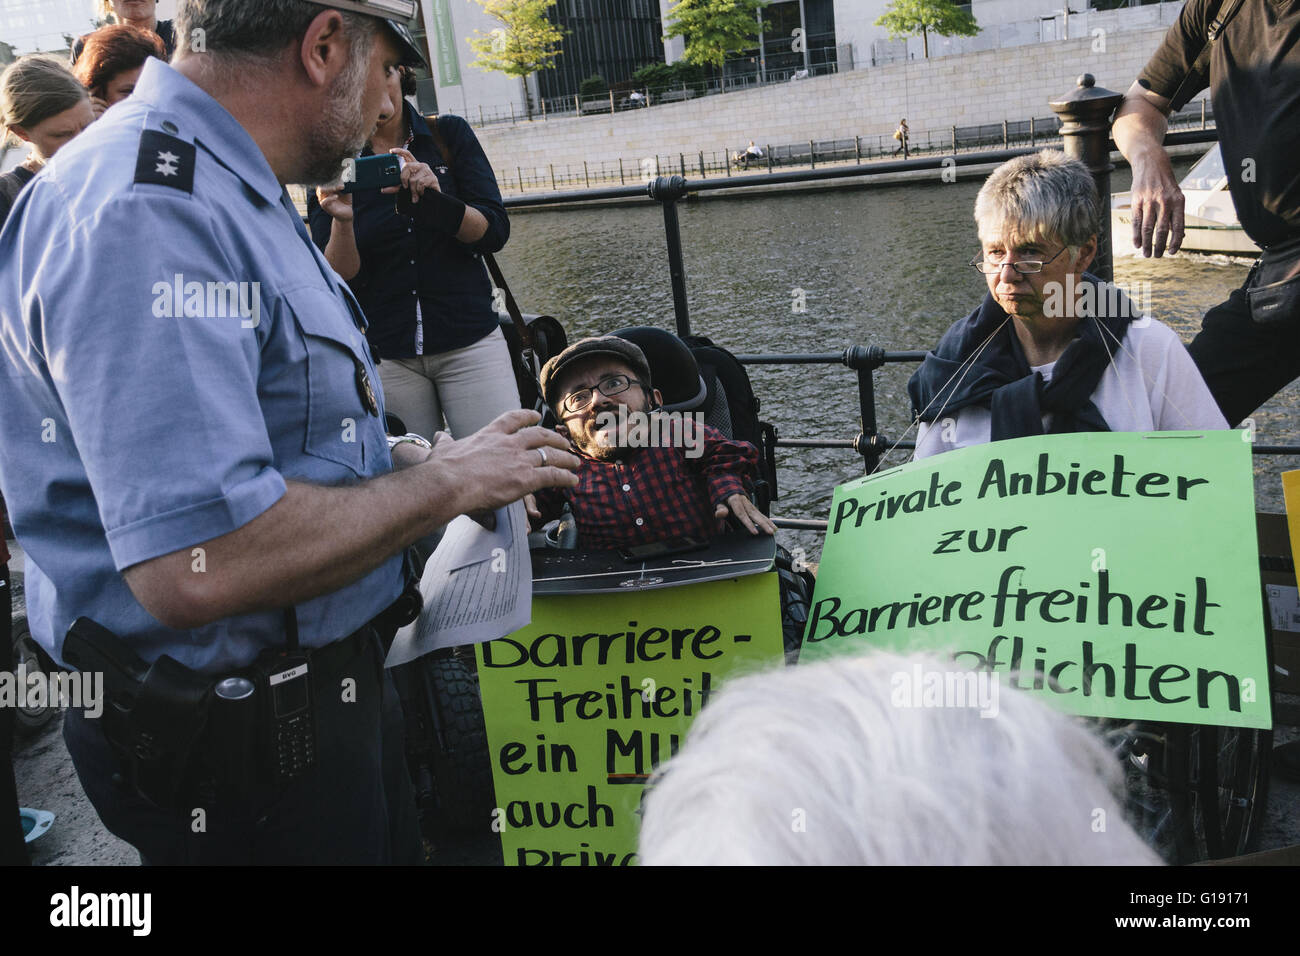 Berlin, Berlin, Germany. 11th May, 2016. RAUL KRAUTHAUSEN talking to the police while disability rights activists have chained themselves to a railing in Berlin's government district. The protesters ask for a full implementation of the Disability Rights Convention of the United Nations as part of the promised federal participation law and support for assistance and domestic care regardless of income. © Jan Scheunert/ZUMA Wire/Alamy Live News Stock Photo